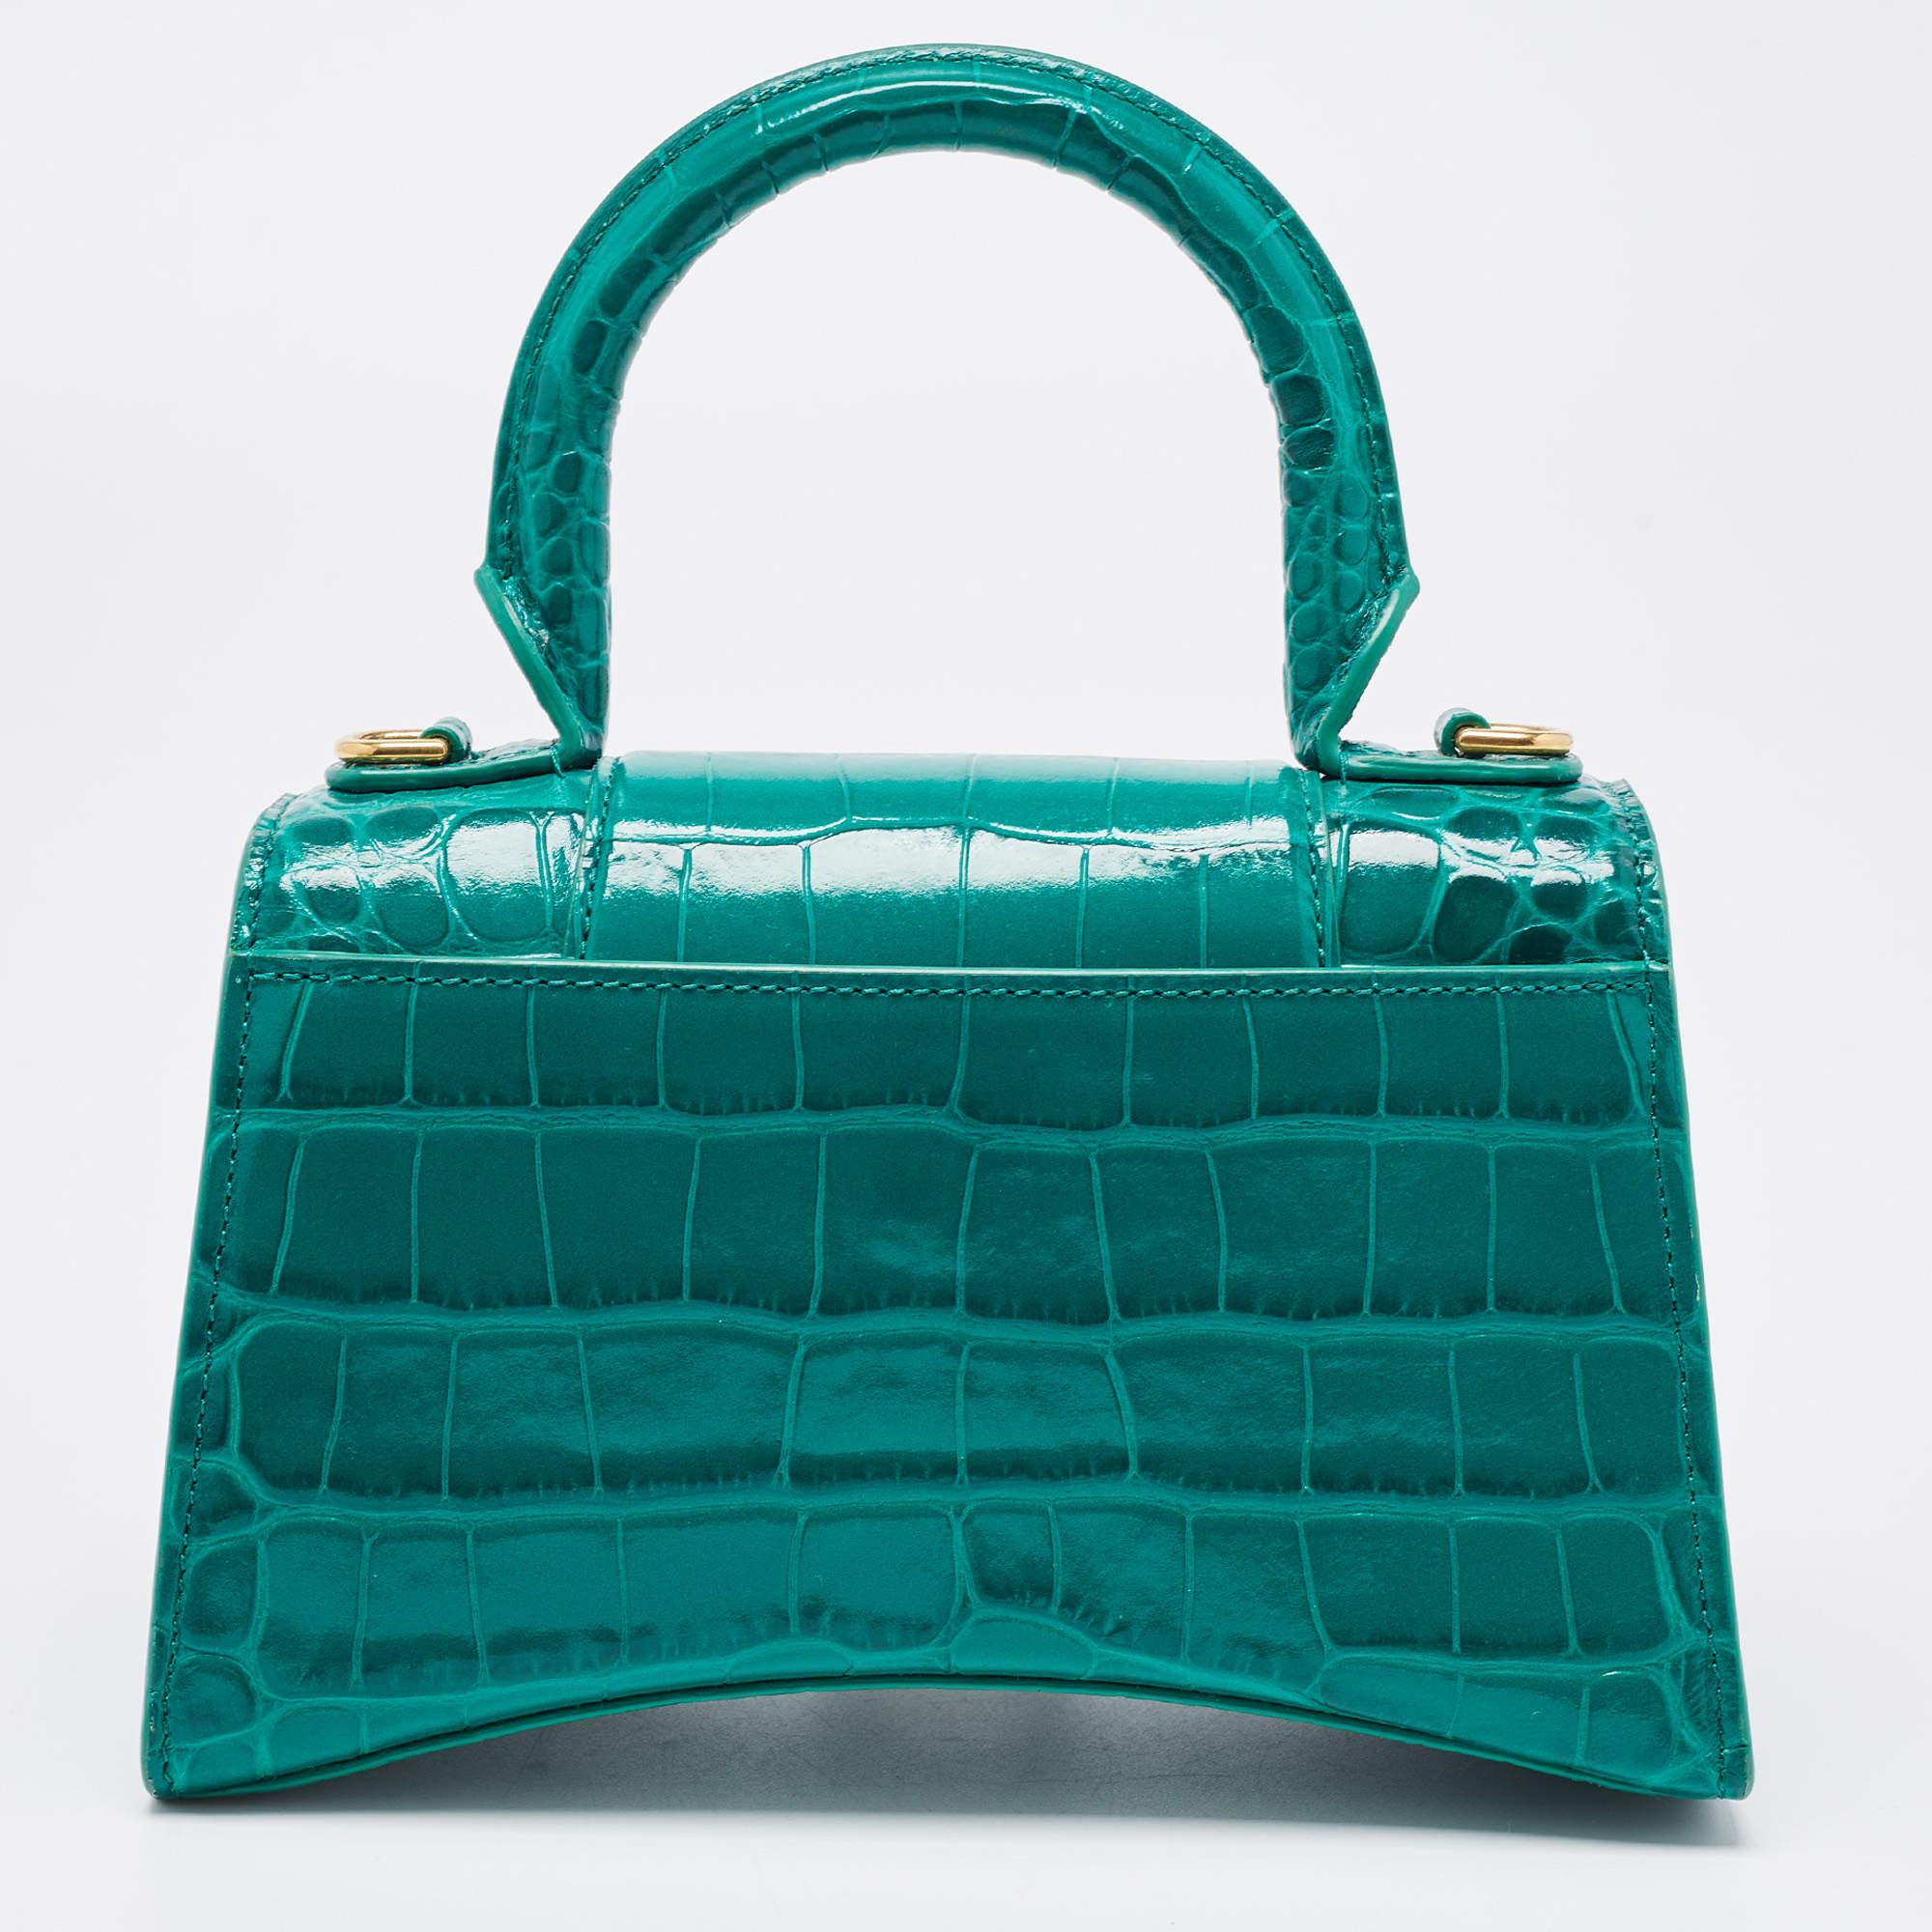 The Hourglass features an croc-embossed leather body, a rolled top handle, a detachable flat leather shoulder strap, a front flap with magnetic snap closure, and a spacious interior.

